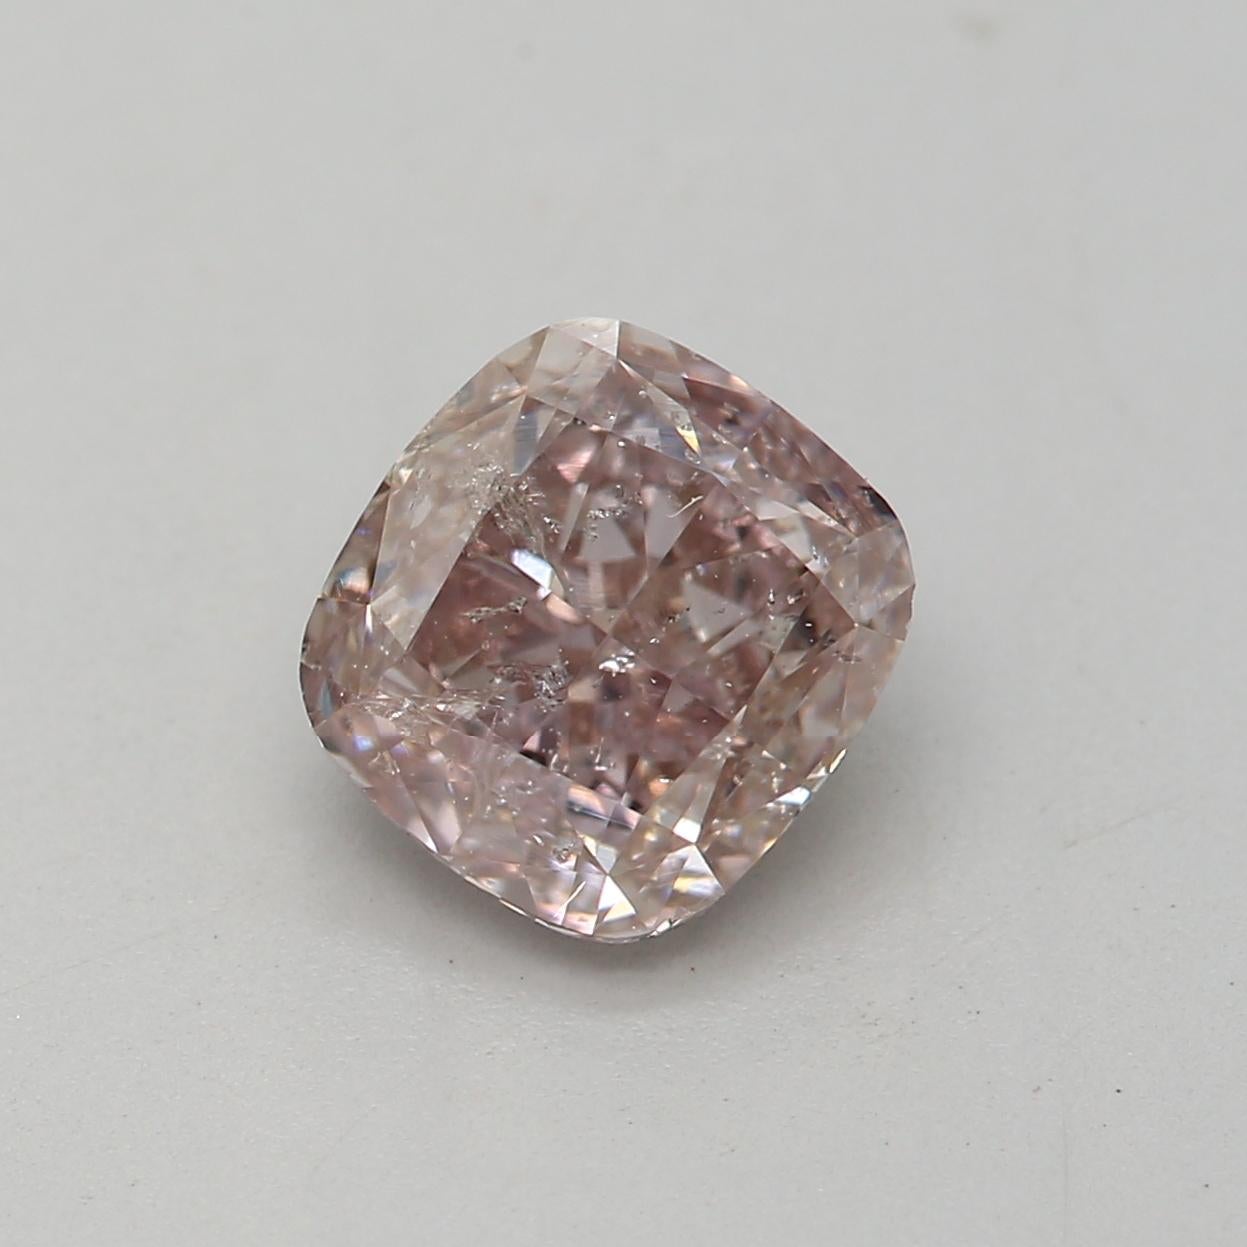 *100% NATURAL FANCY COLOUR DIAMOND*

✪ Diamond Details ✪

➛ Shape: Cushion
➛ Colour Grade: Fancy Brownish Pink
➛ Carat: 1.00
➛ Clarity: I2
➛ GIA Certified 

^FEATURES OF THE DIAMOND^

Our 1-carat diamond typically weighs 0.2 grams and is a popular